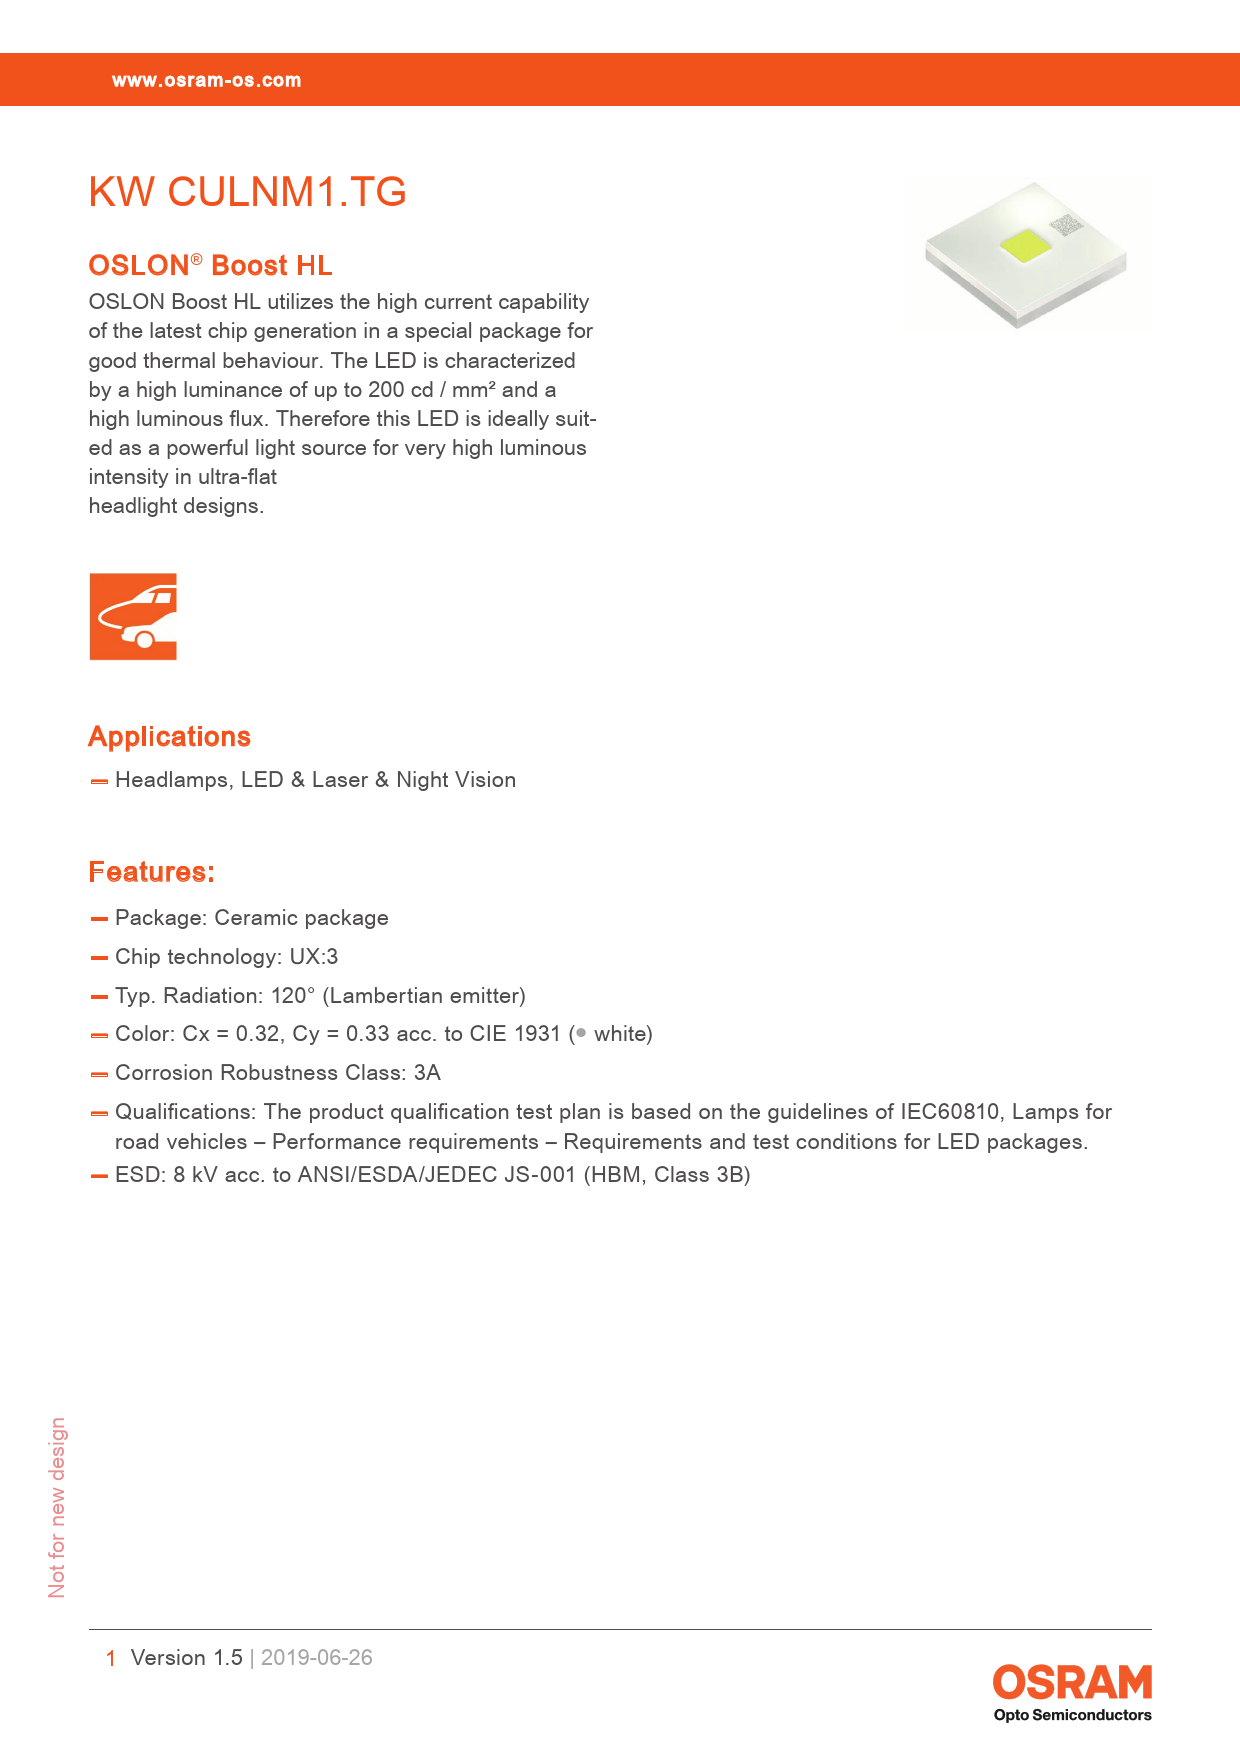 Datasheet KW CULNM1.TG - OSLON Boost HL OSRAM - Preview and Download